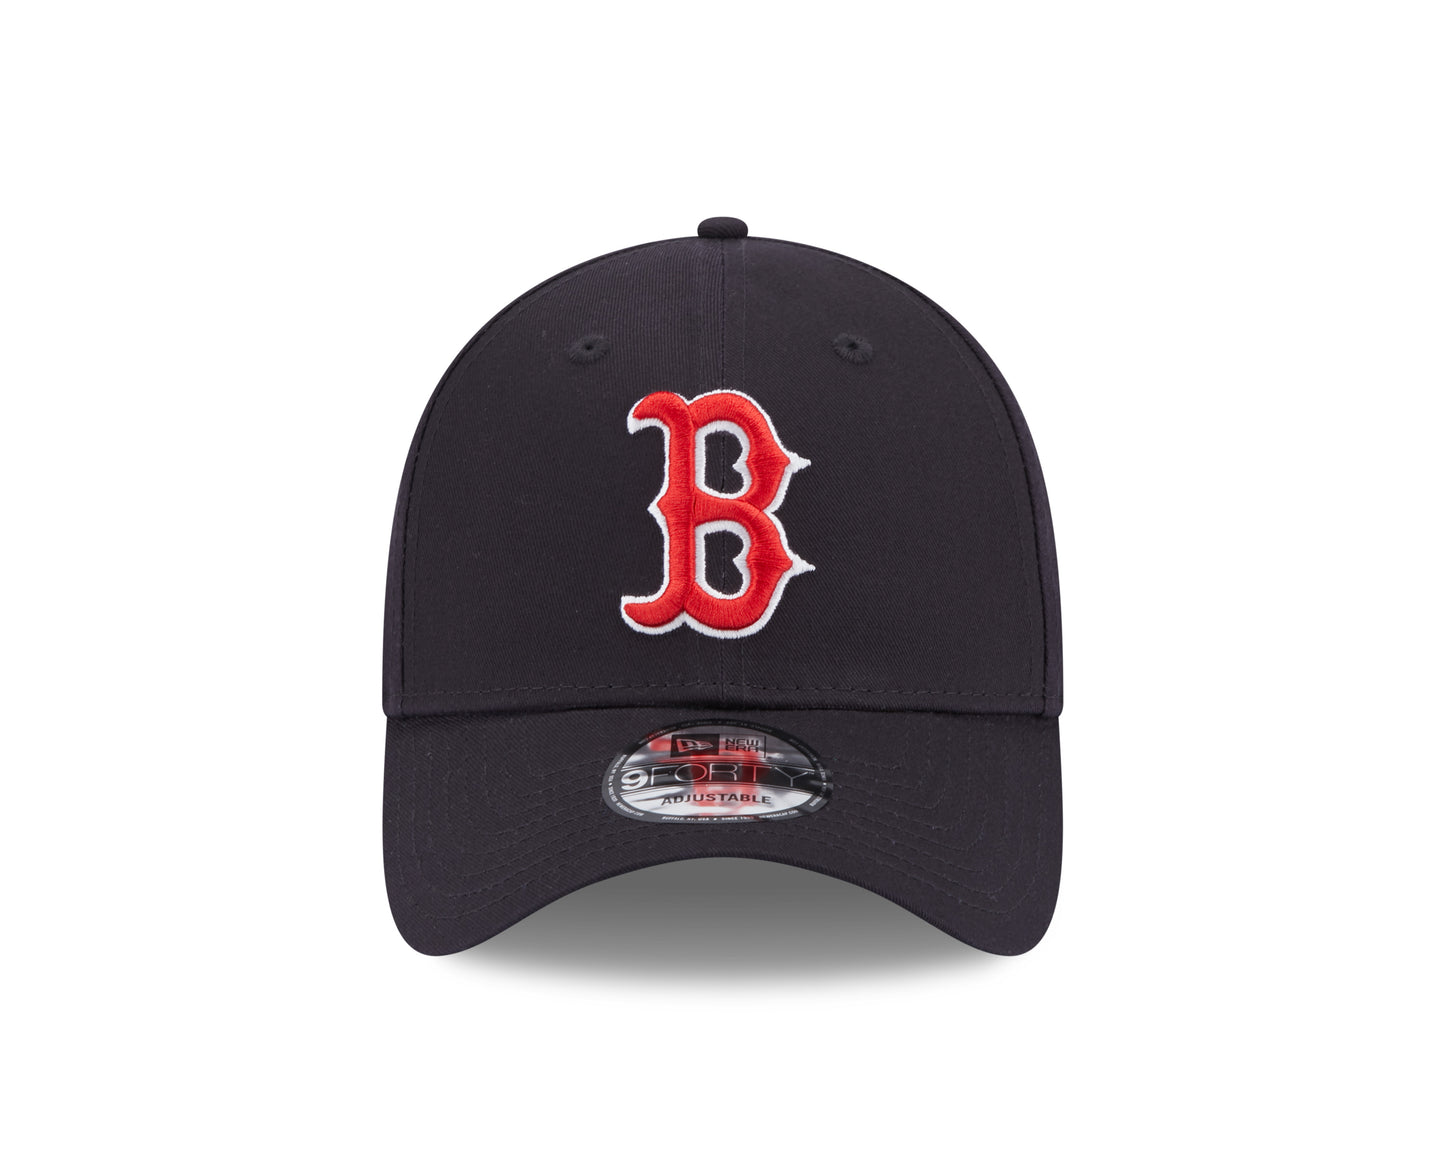 NEW ERA 9FORTY BOSTON RED SOX TEAM SIDE PATCH BLACK / KELLY GREEN UV CAP